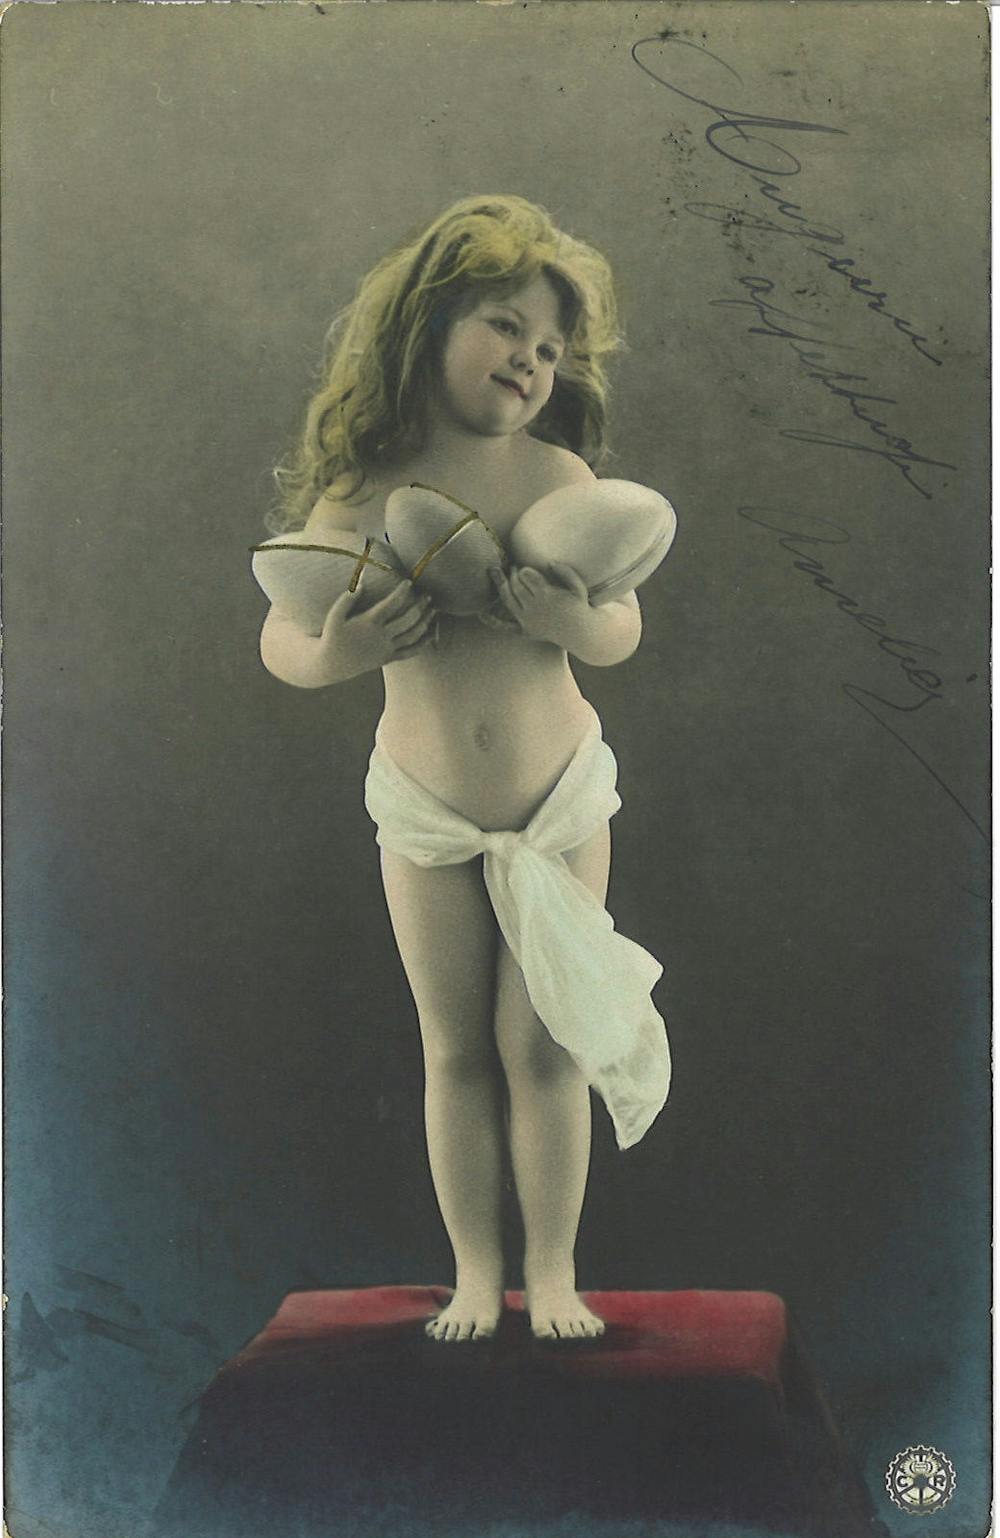 Italian Sex Drawings - Between innocence and experience: the sexualisation of girlhood in 19th  century postcards